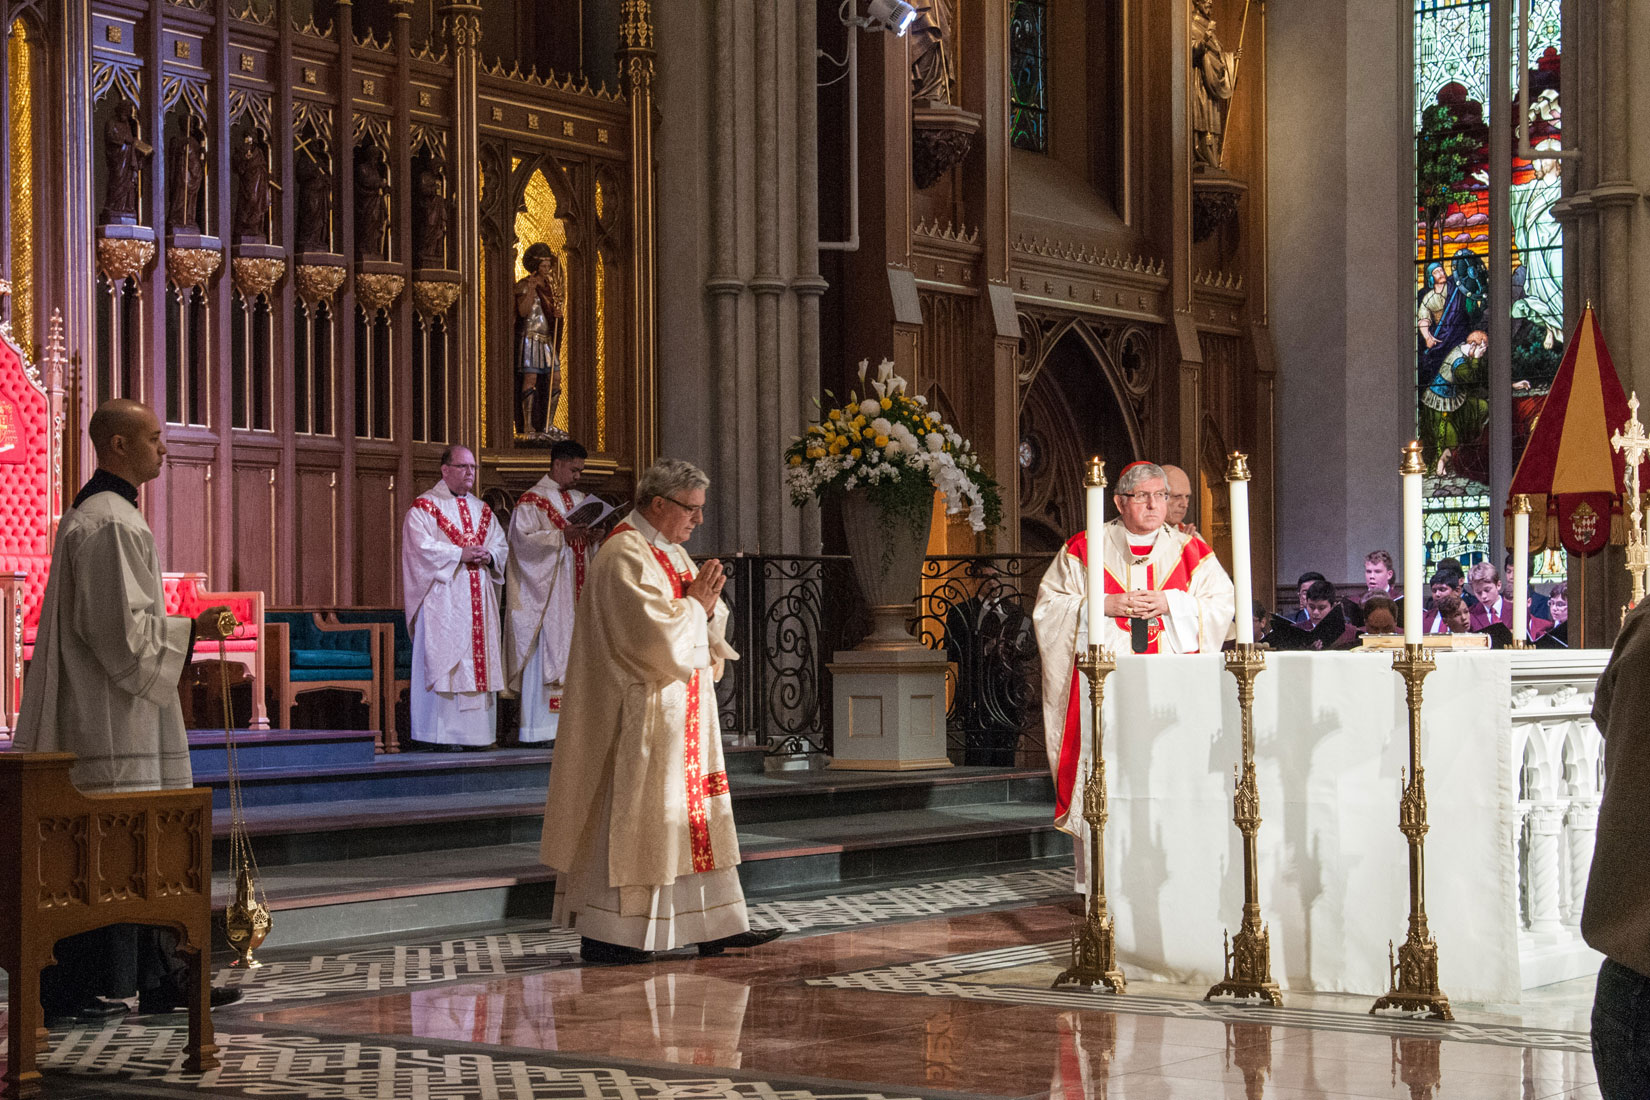 The workers’ thanksgiving Mass at St. Michael’s Cathedral Sept. 30. (Photo by Michael Swan)